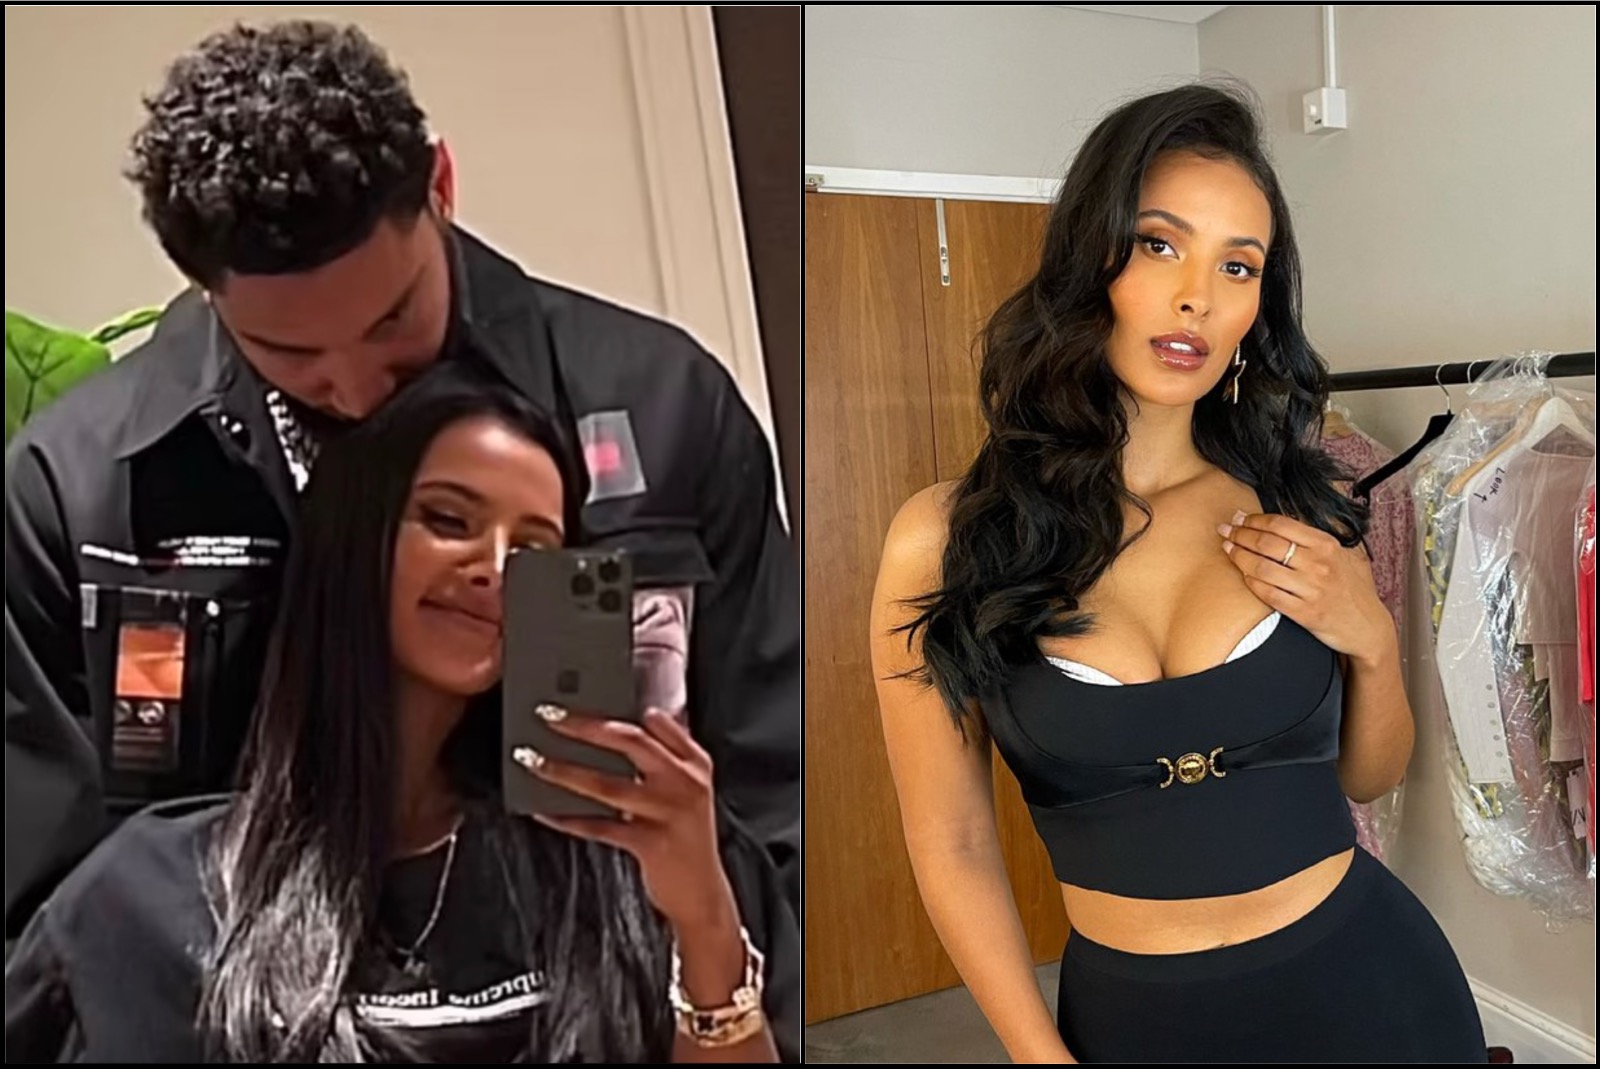 Ben Simmons And Maya Jama Have Reportedly Ended Their Engagement